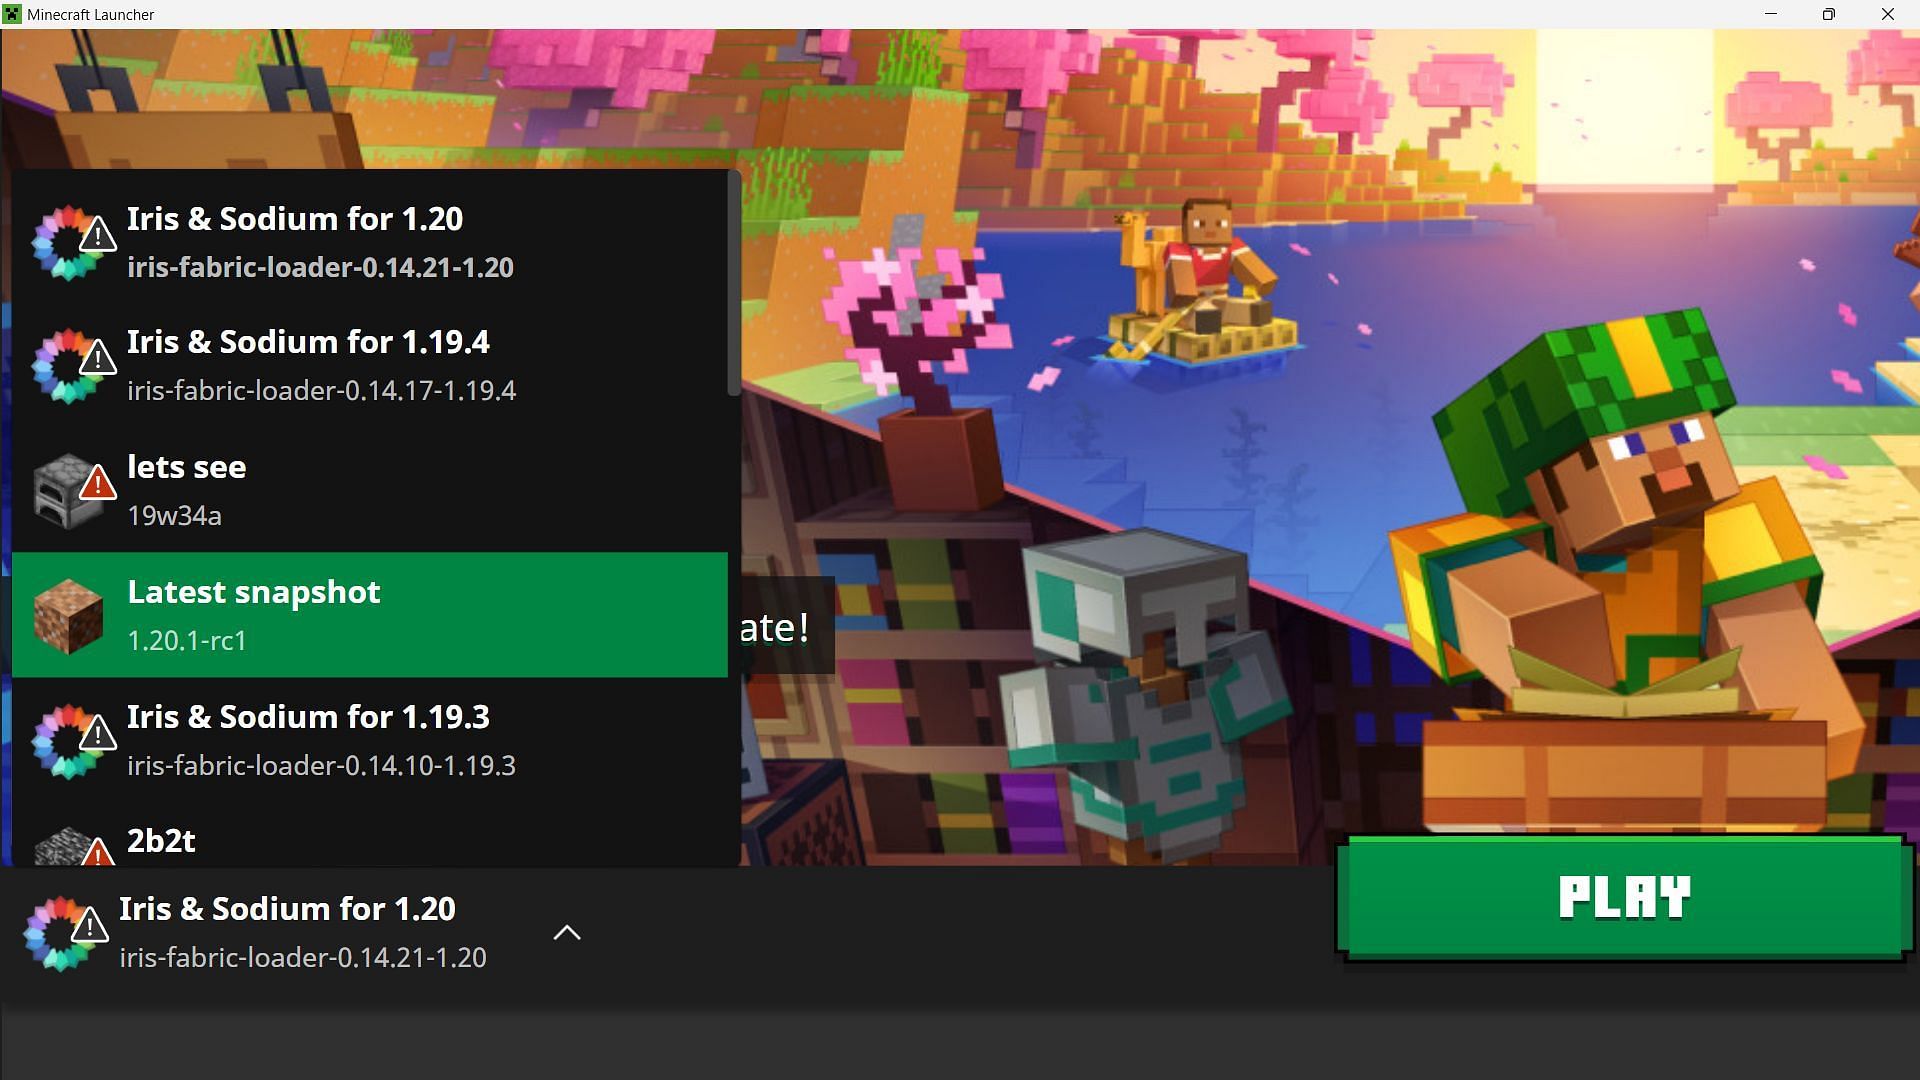 Players can easily download the Minecraft 1.20.1 release candidate 1 from the official game launcher (Image via Sportskeeda)